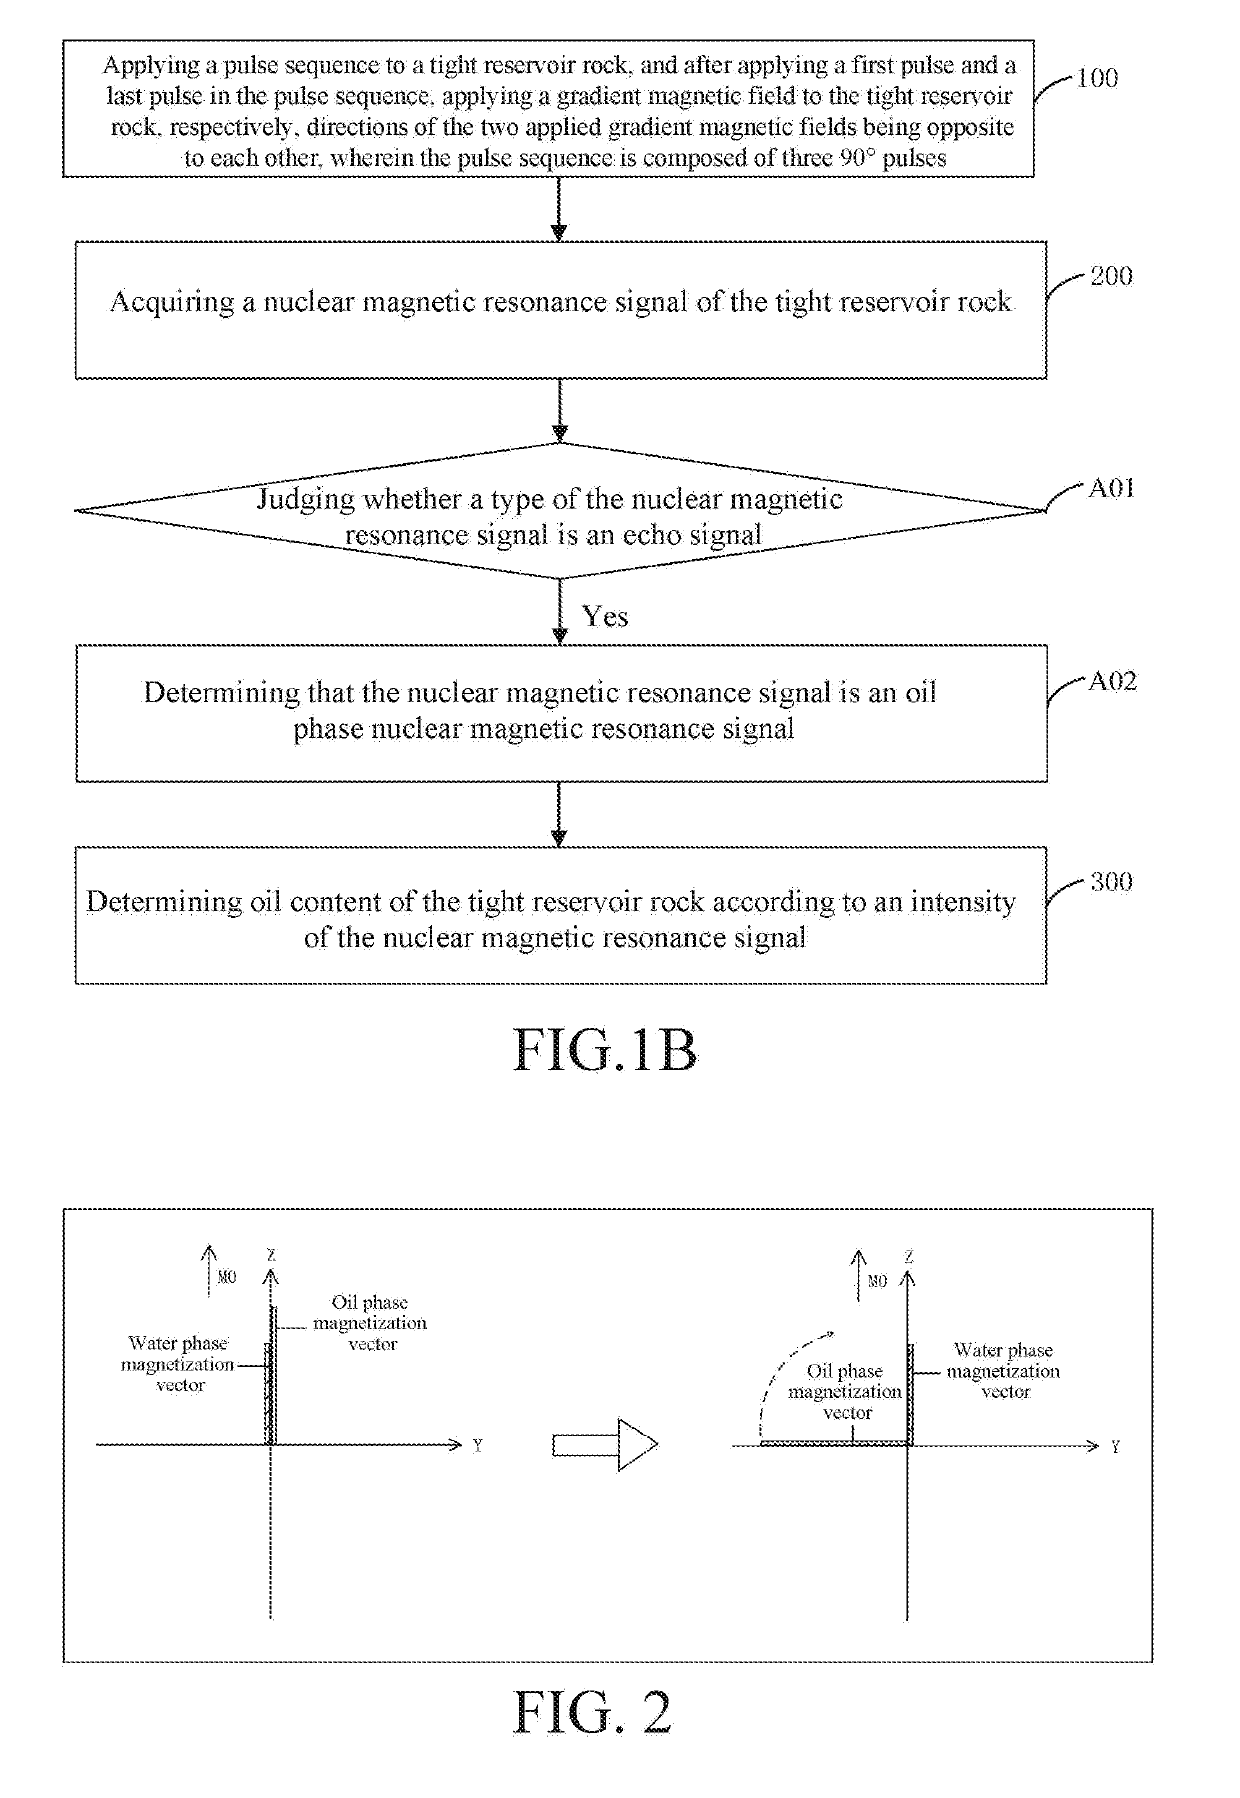 Method and apparatus for measuring oil content of tight reservoir based on nuclear magnetic resonance